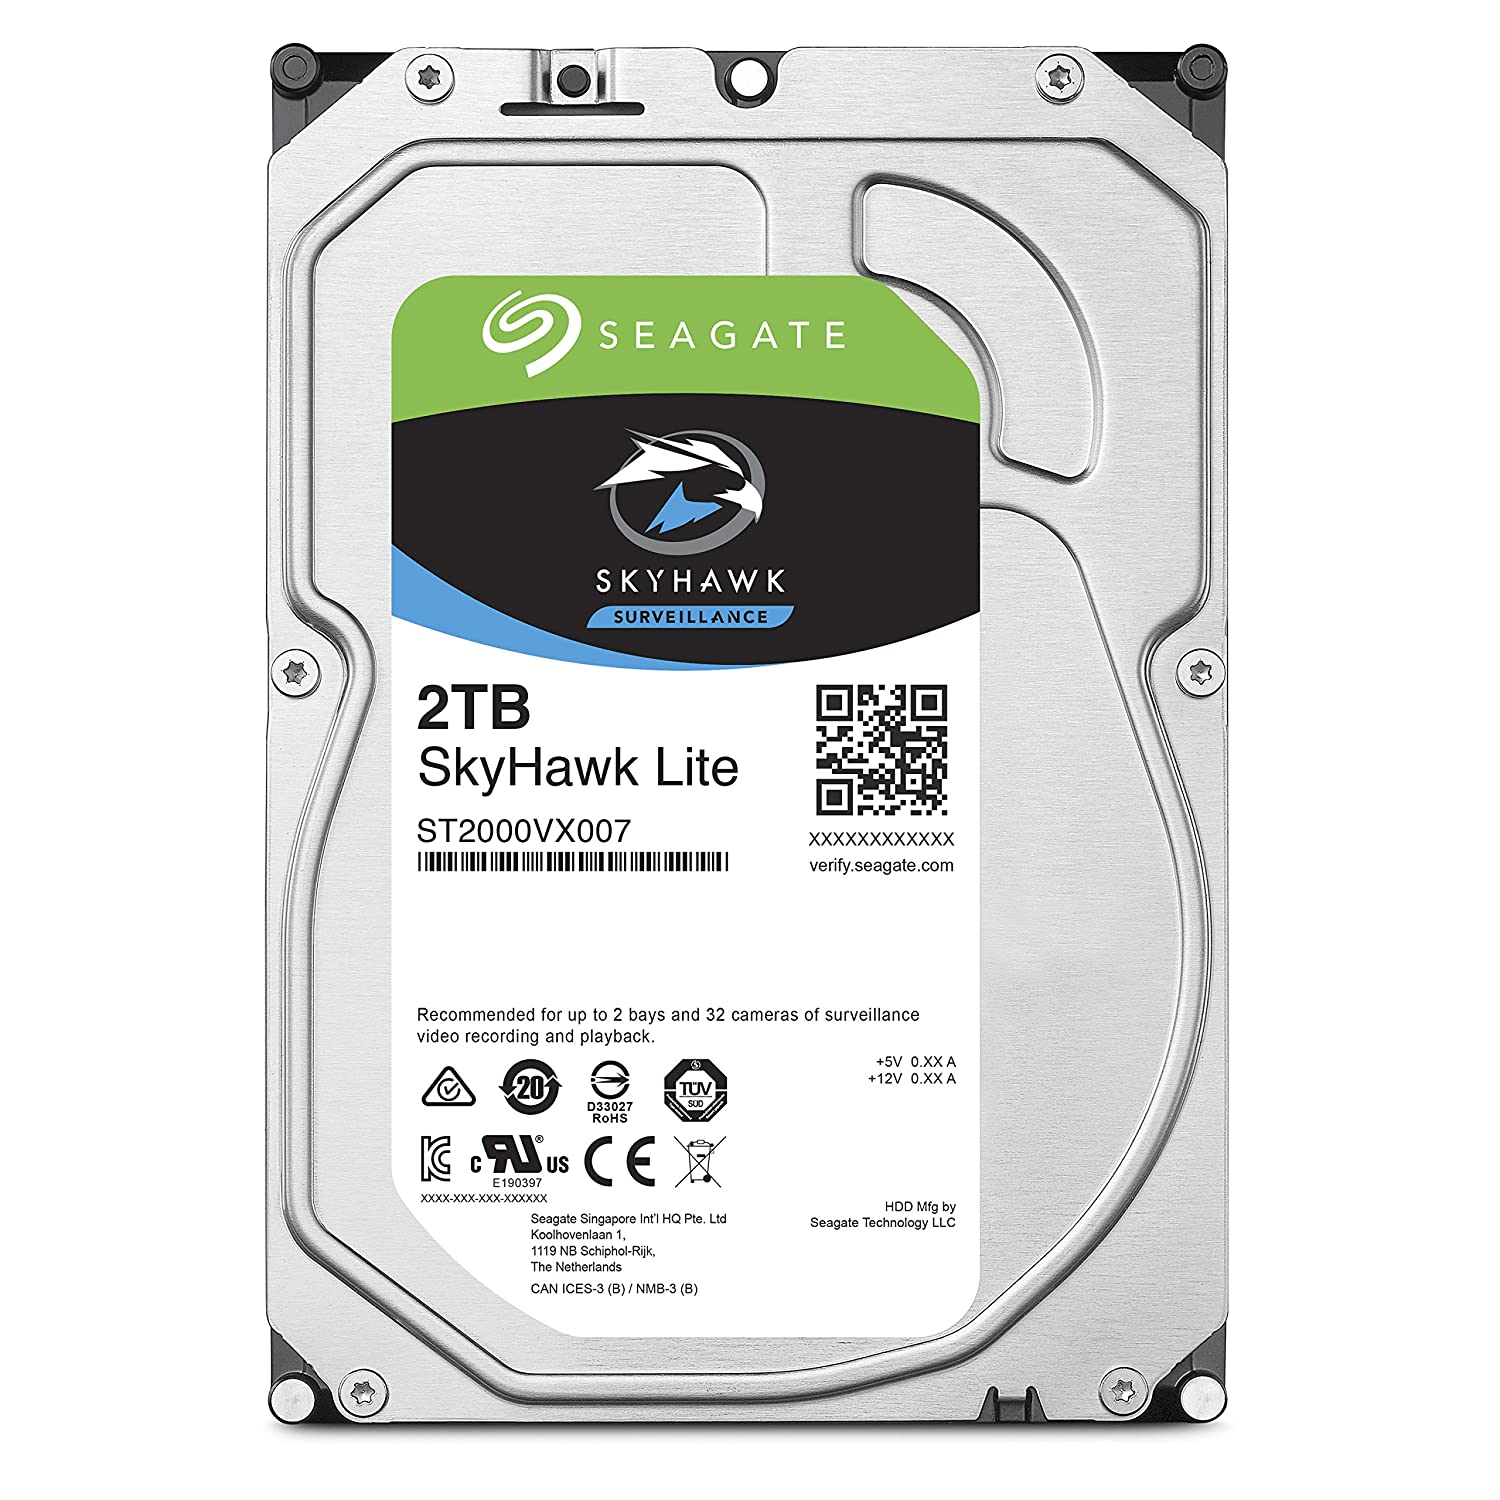 seagate hard disk recovery software